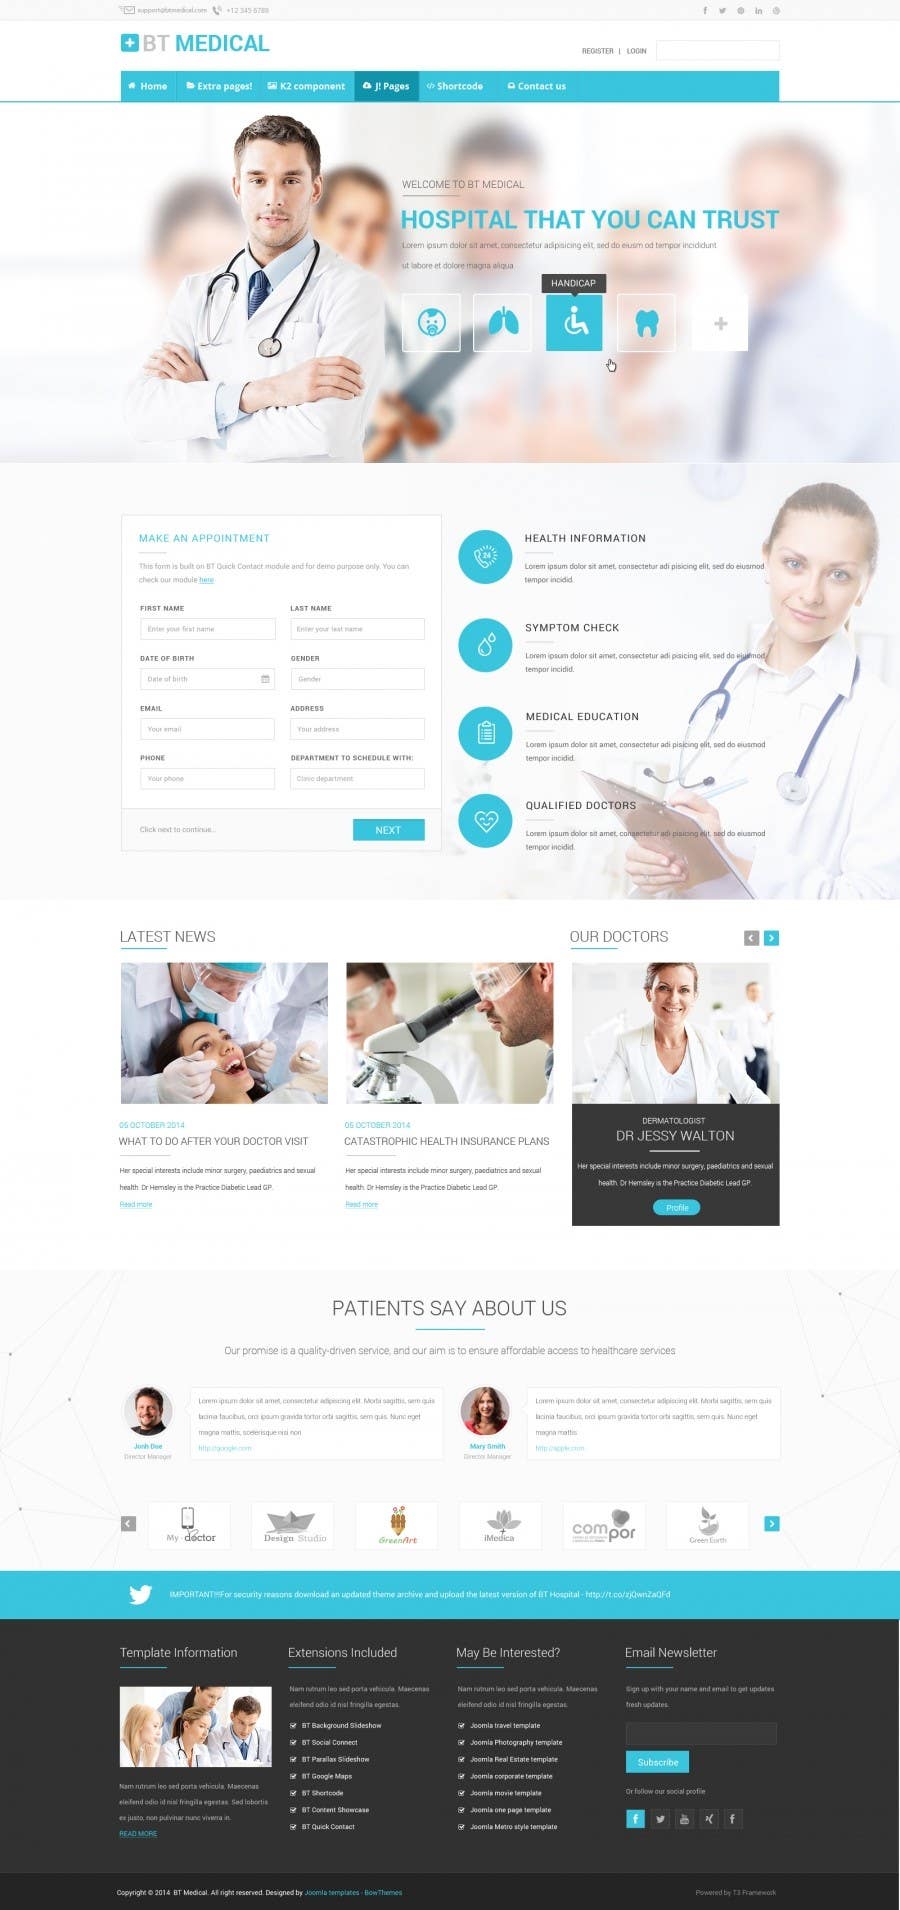 Contest Entry #2 for                                                 Design a Website Mockup for a Clinic
                                            